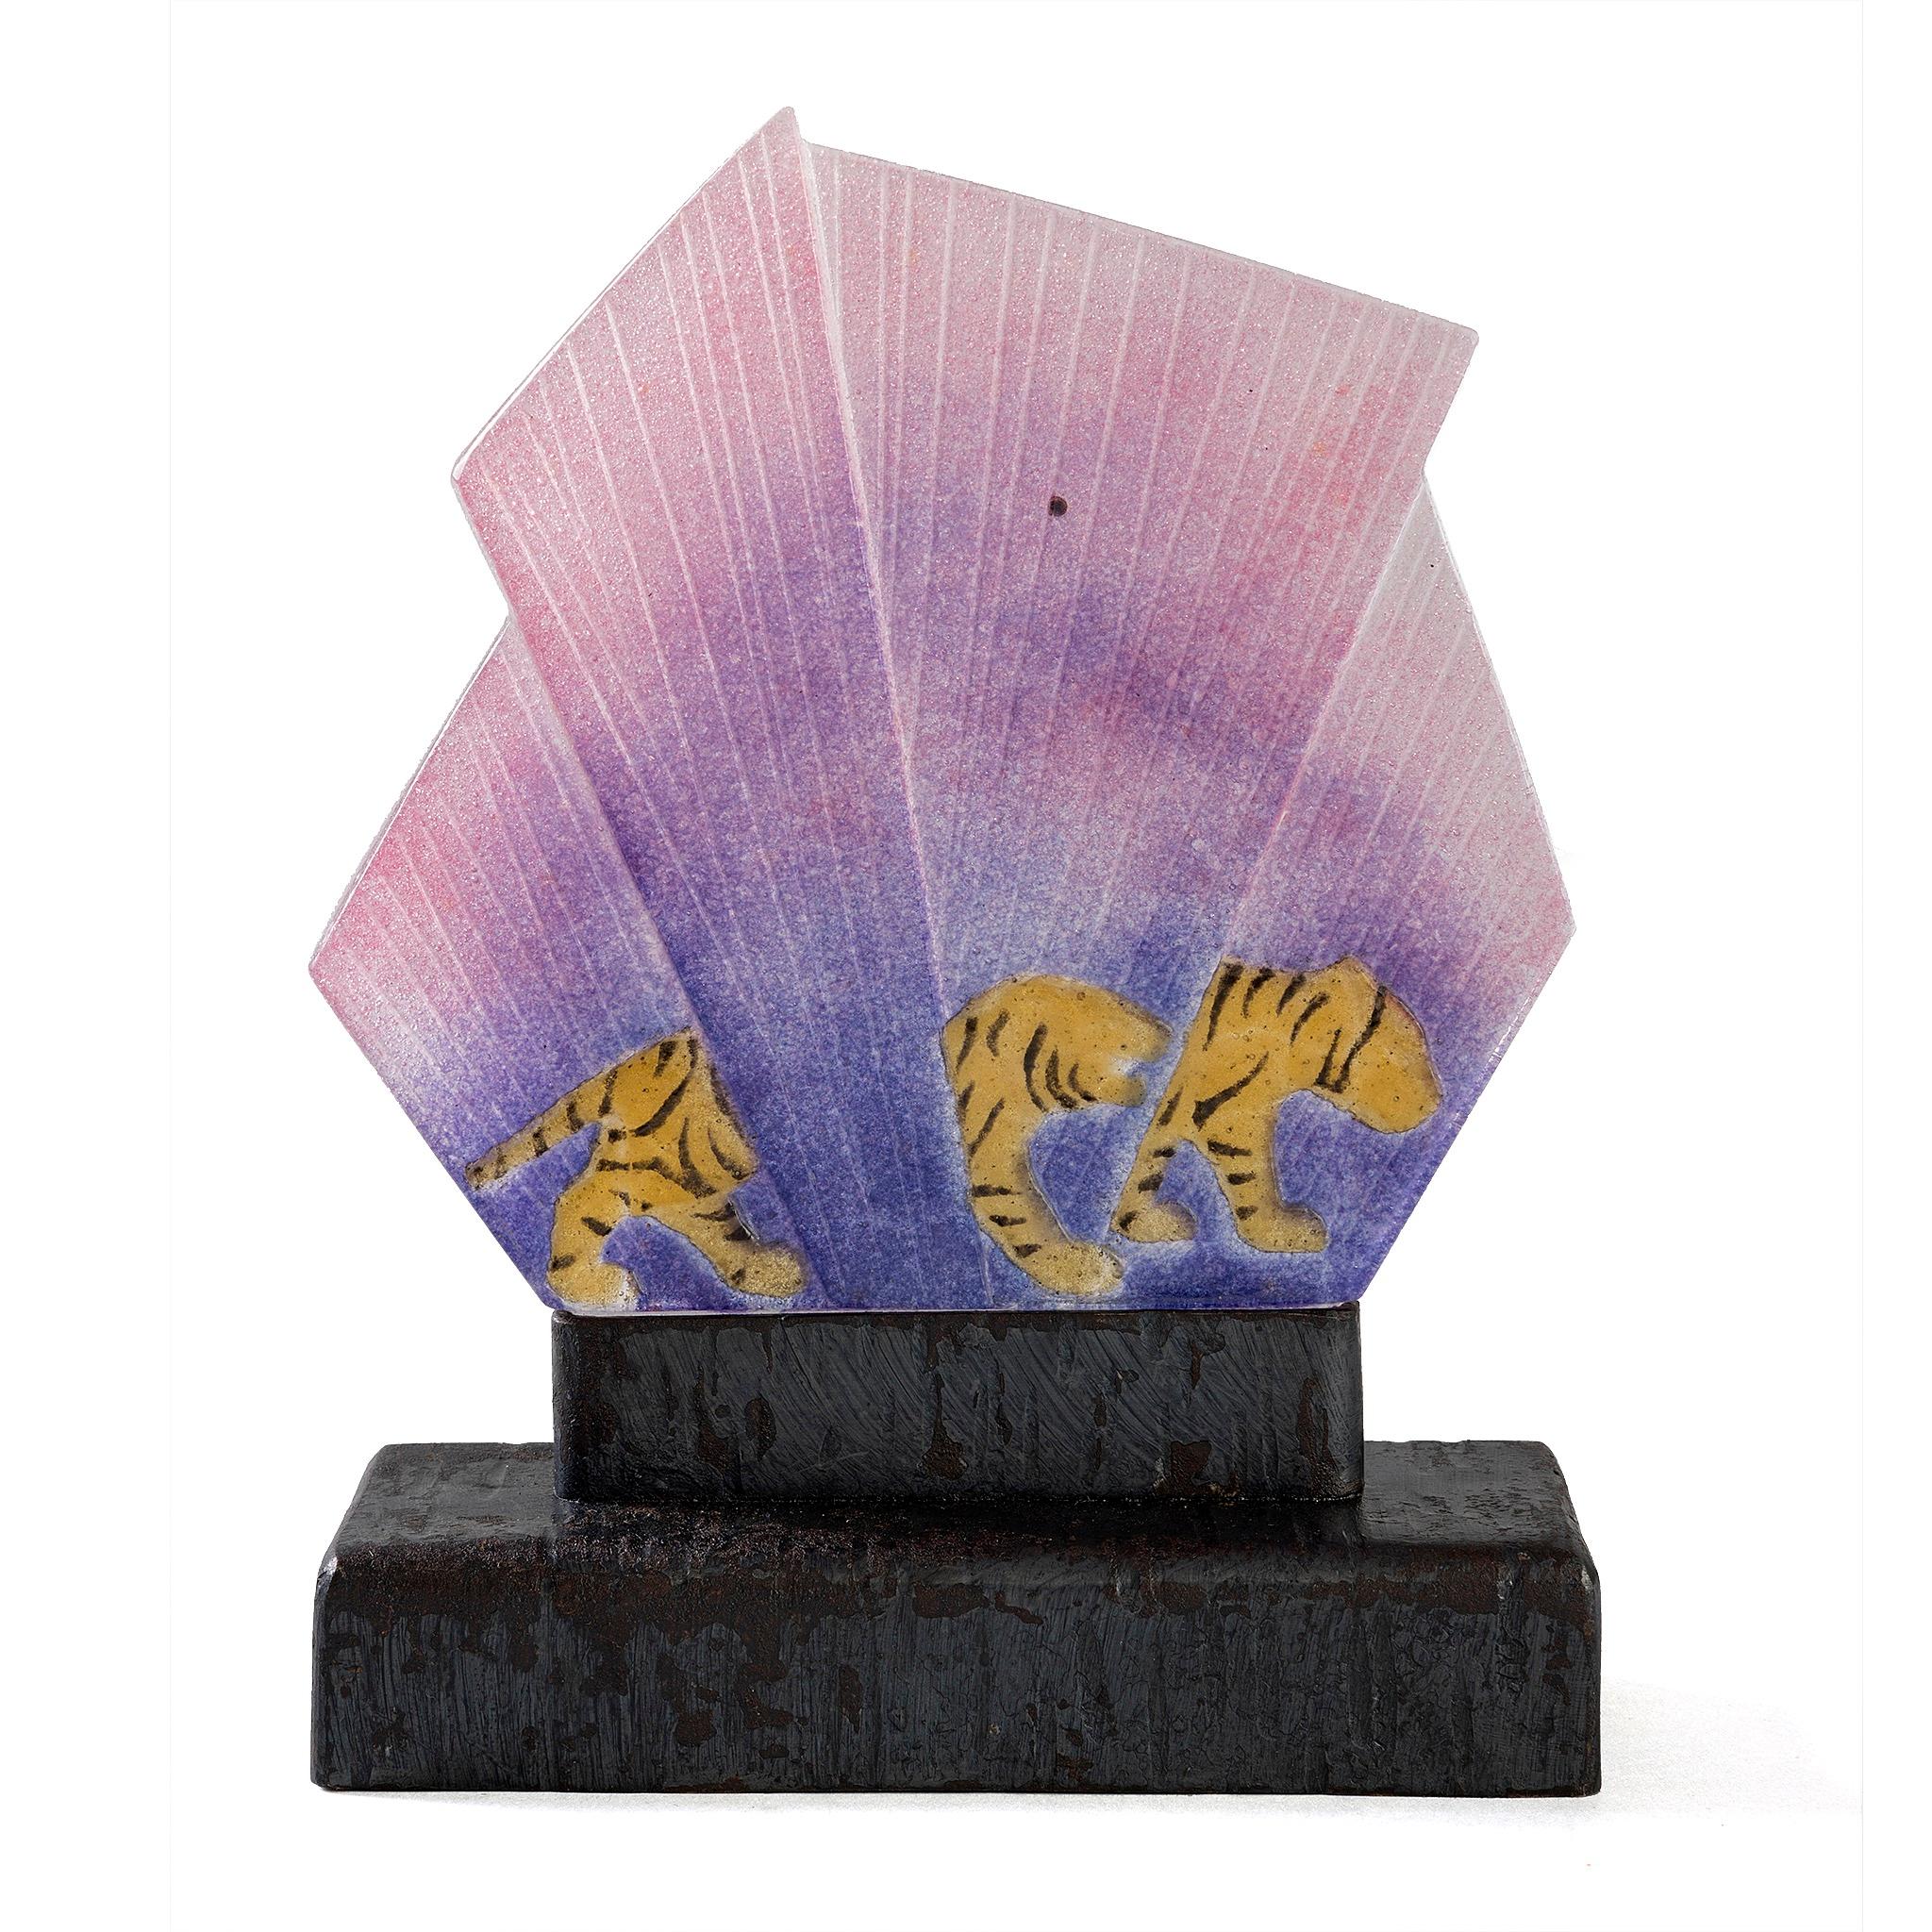 A French Art Deco Pate-de-verre Lamp by Gabriel Argy-Rousseau depicts two red tigers stalking their prey in a fan of purple grass. The pate-de-verre rests upon a wrought iron base also incised with tiger-like grooves. The fin de siècle French